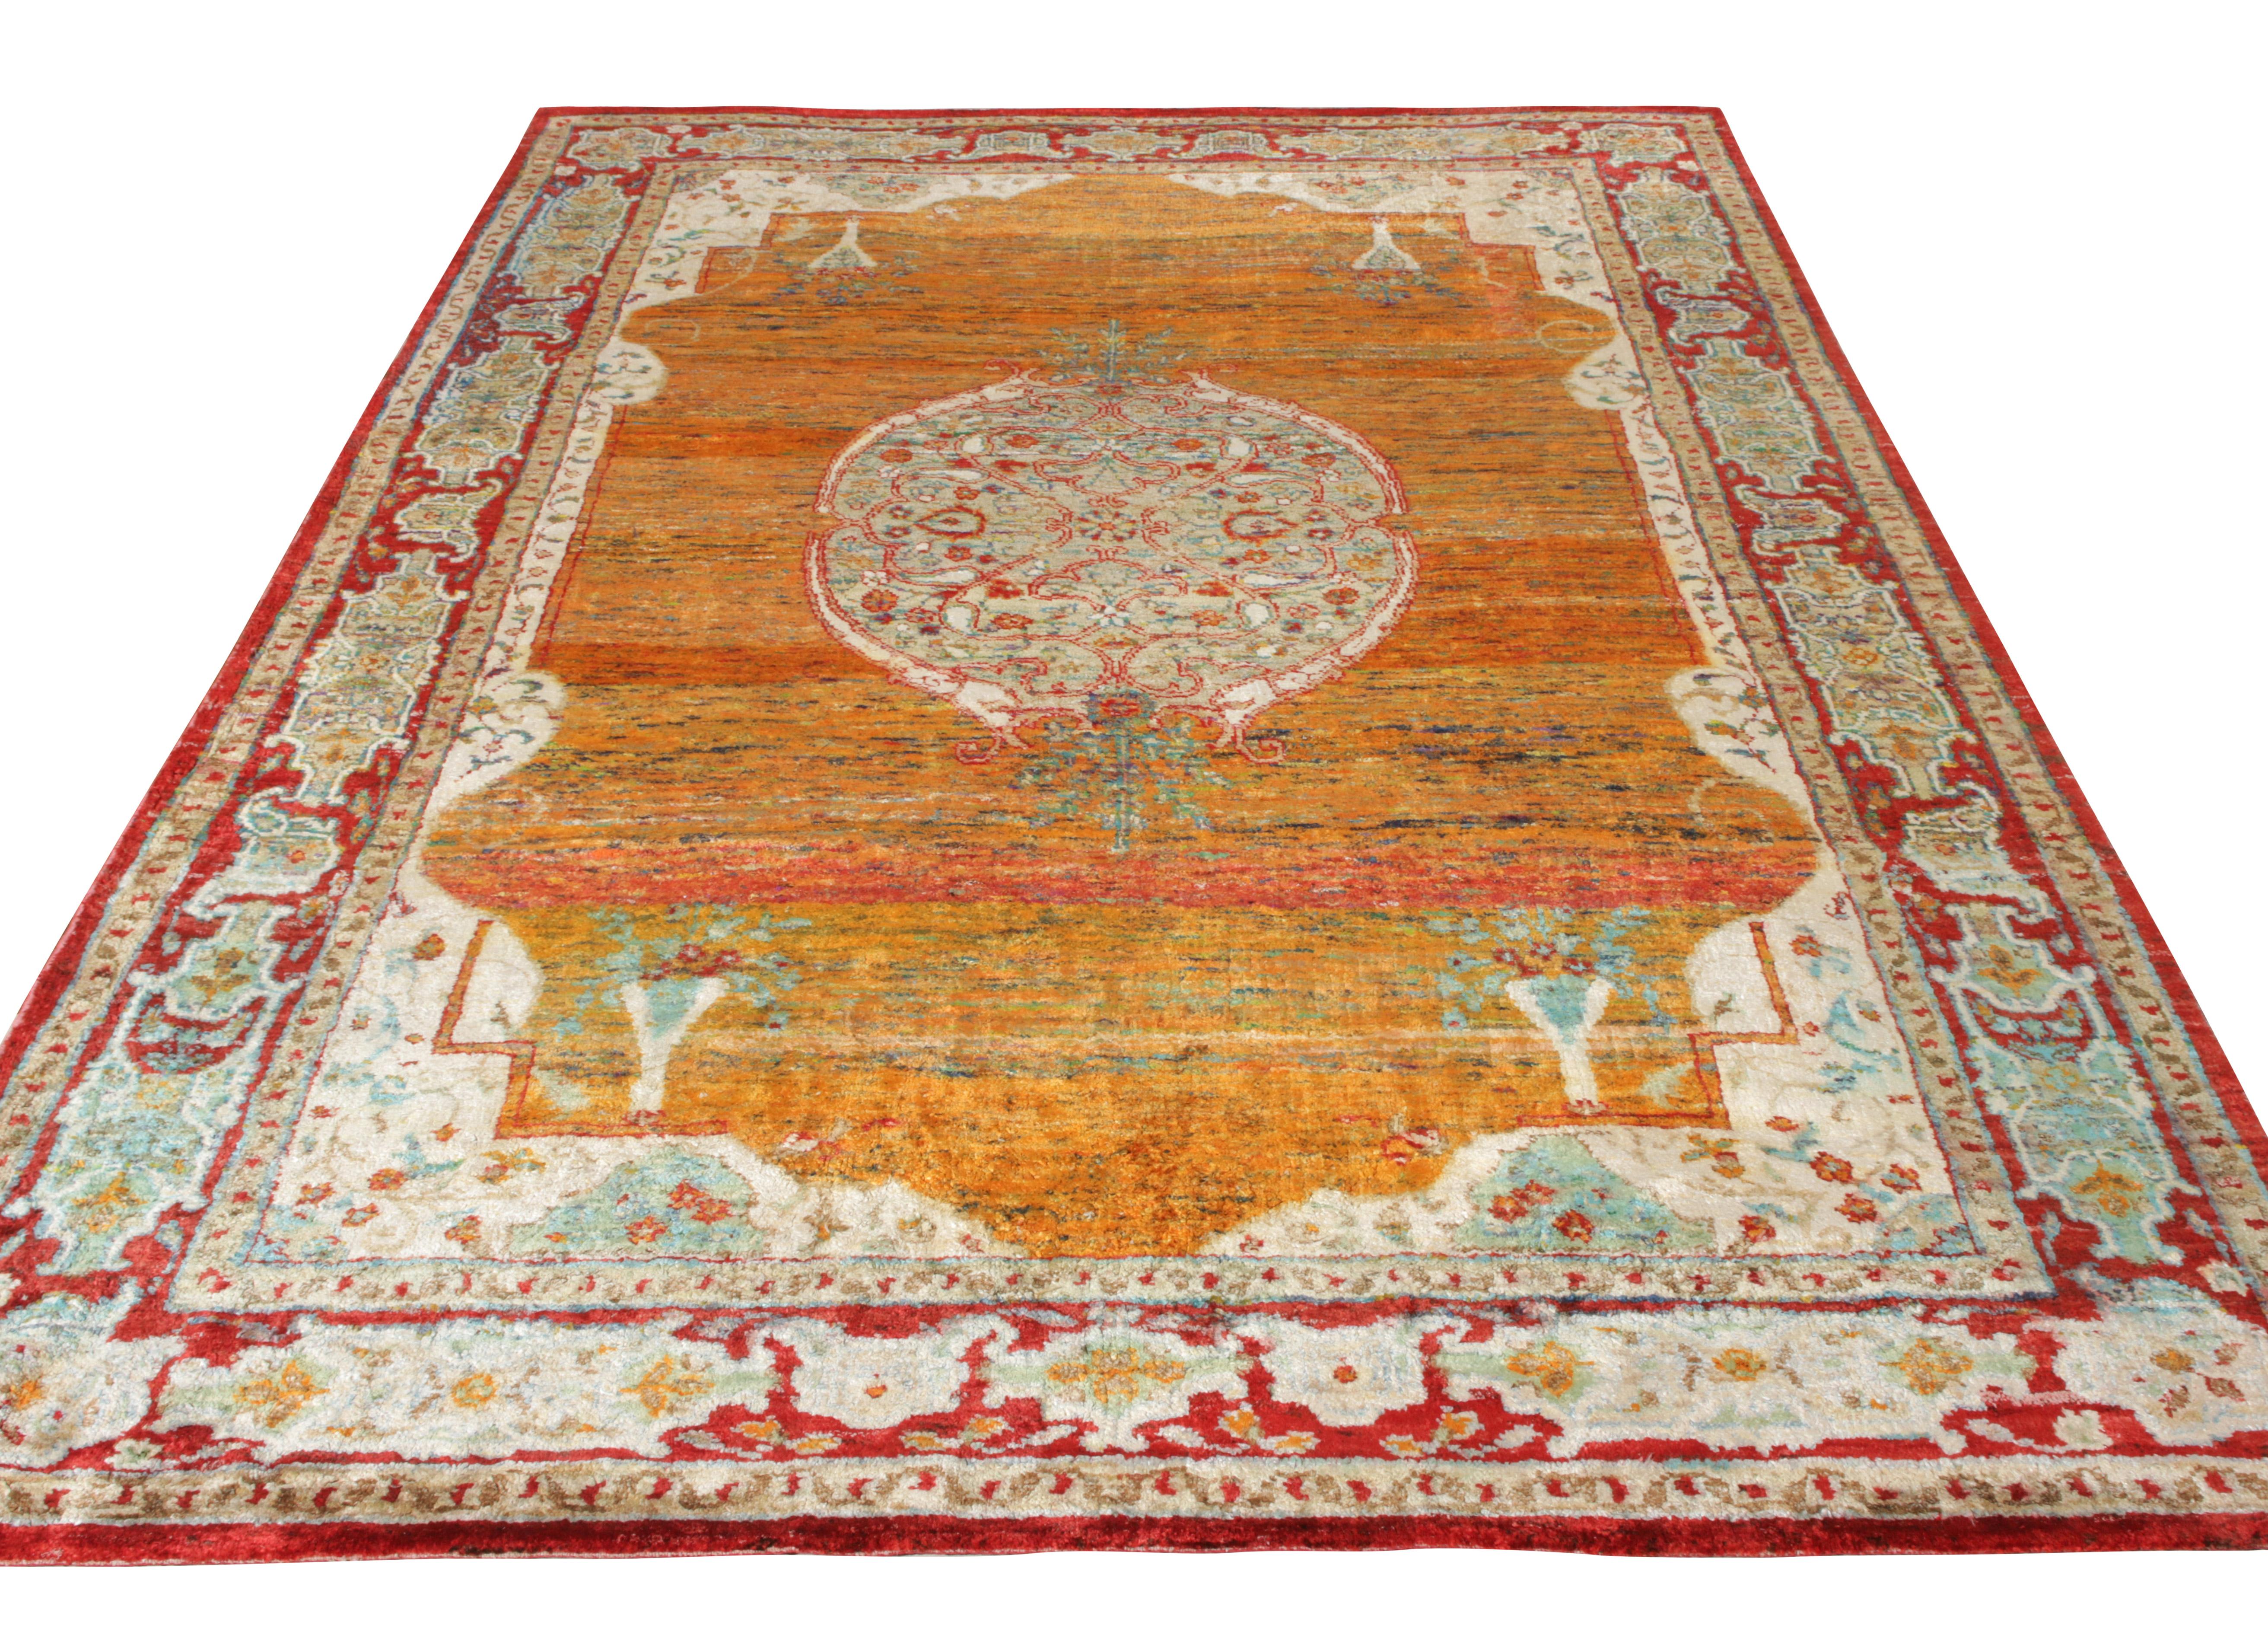 Hand knotted in silk, Rug & Kilim makes a modern take on classic Agra style joining their Modern Classics Collection. A 6x9 scale witnessing the union of an impactful blue medallion pattern in lively red & orange tones all sitting harmoniously while